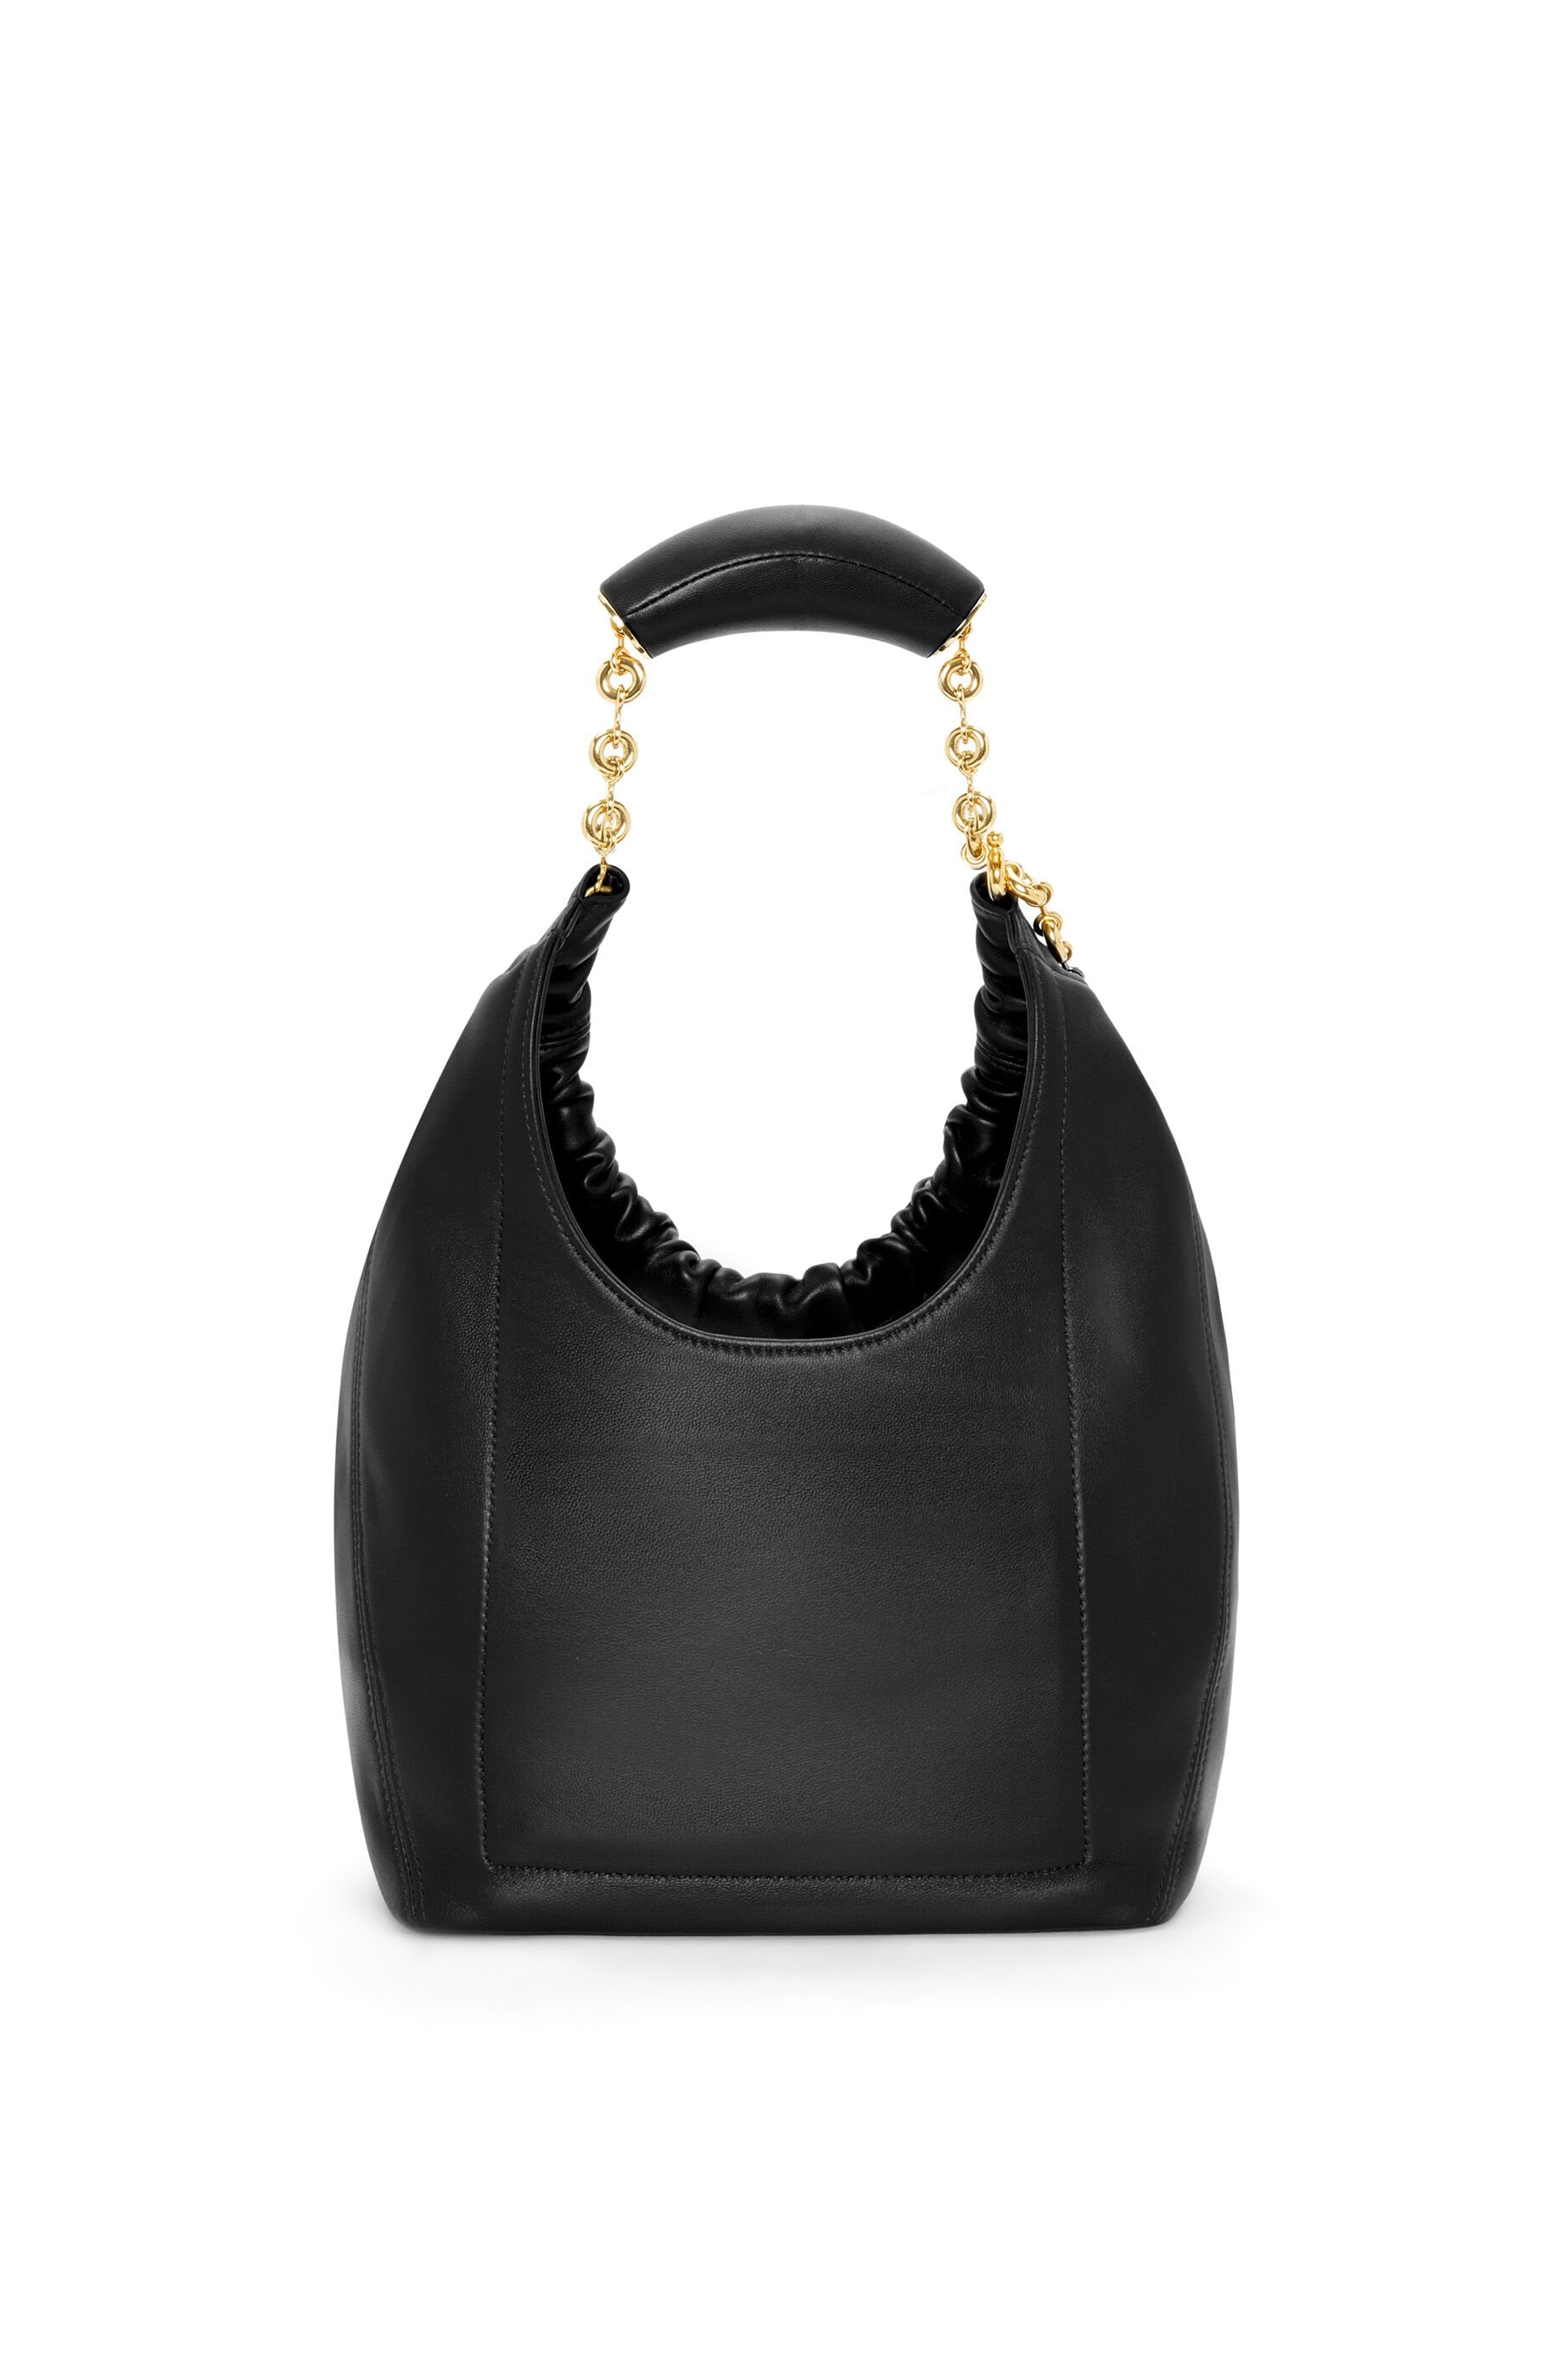 Loewe Small Black Squeeze Bag - KNosce